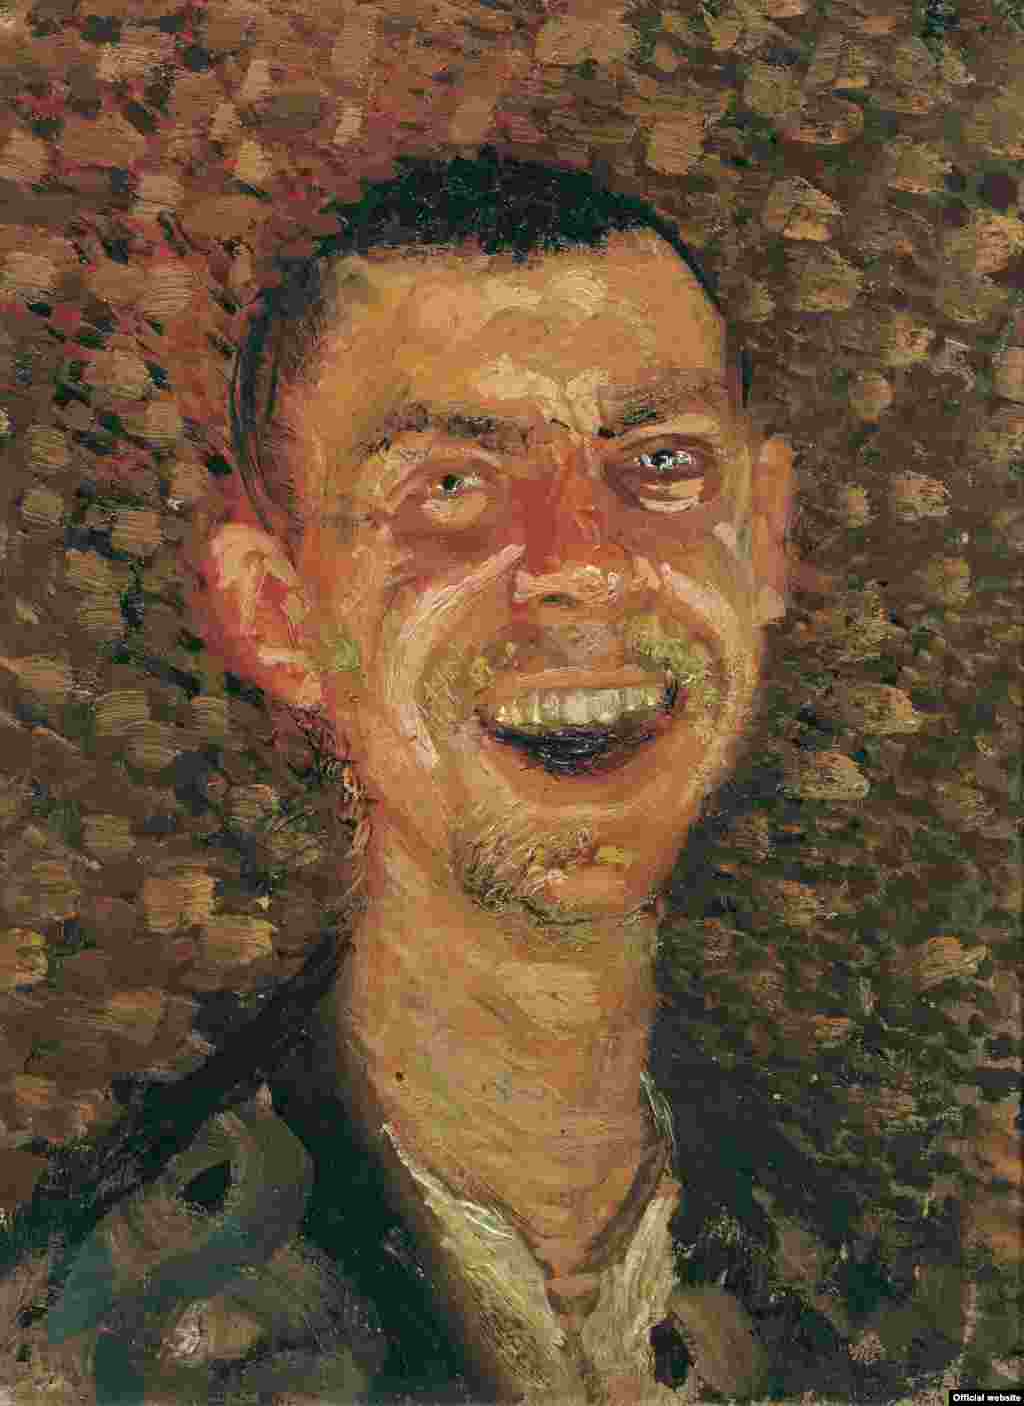 Laughing Self-Portrait, Summer/Fall 1907, Oil on canvas, 40 x 30,5 cm, Belvedere, Vienna